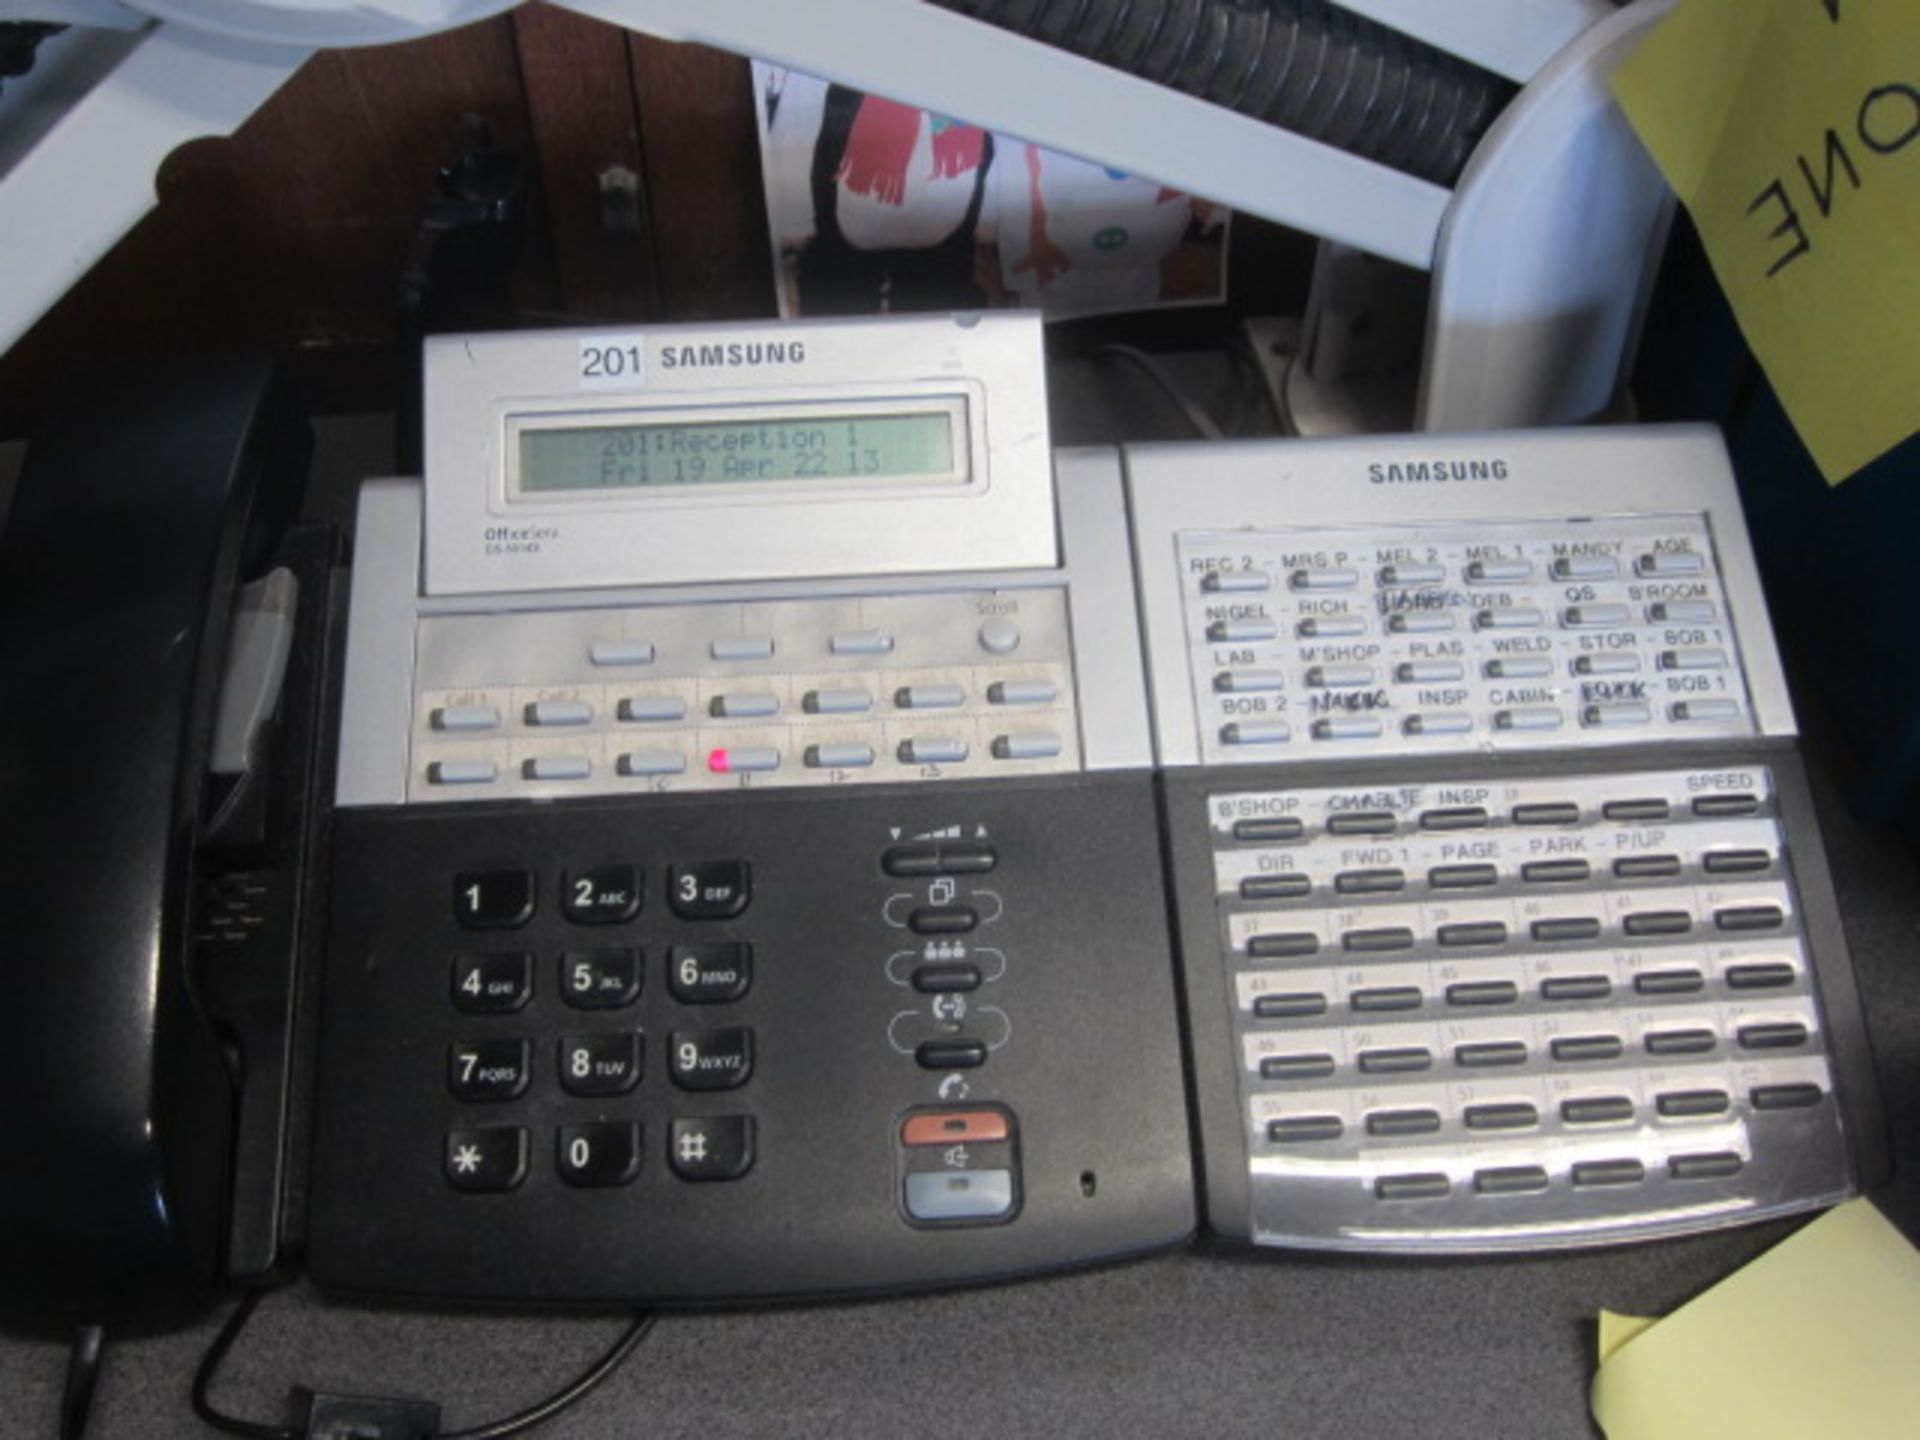 Samsung telephone system with 27 handsets - Image 5 of 6